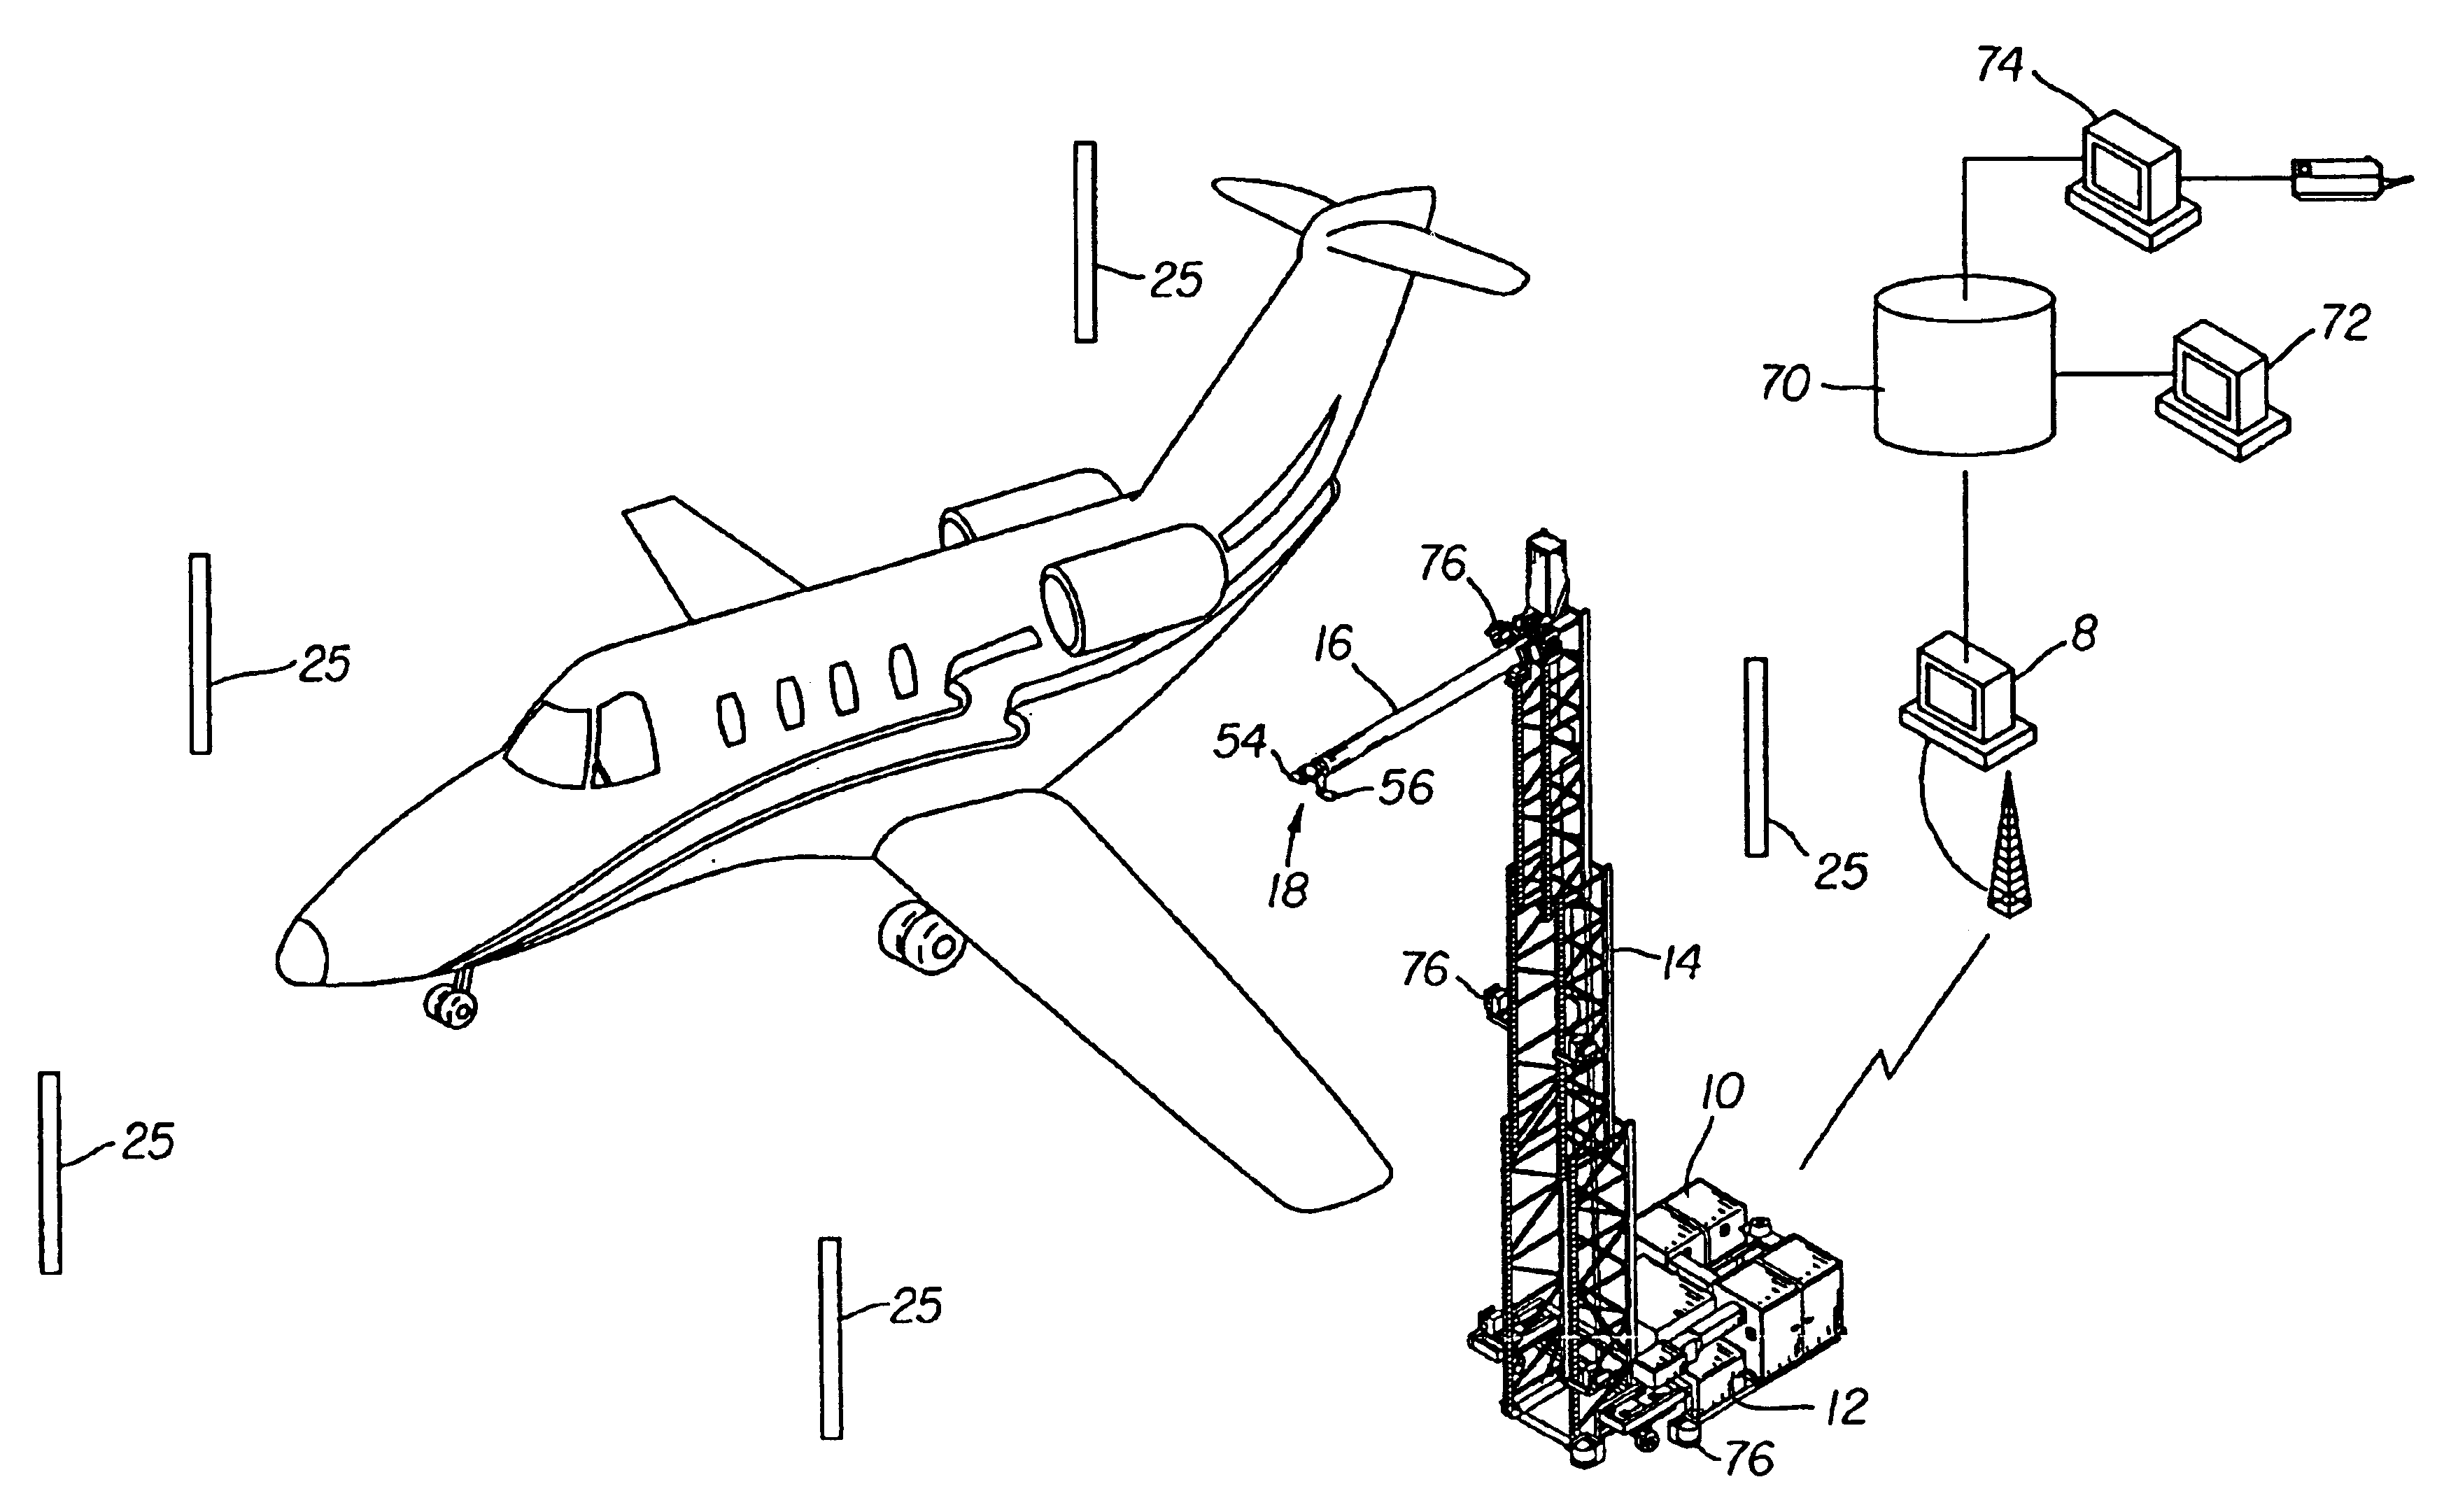 Apparatus and method for non-destructive inspection of large structures